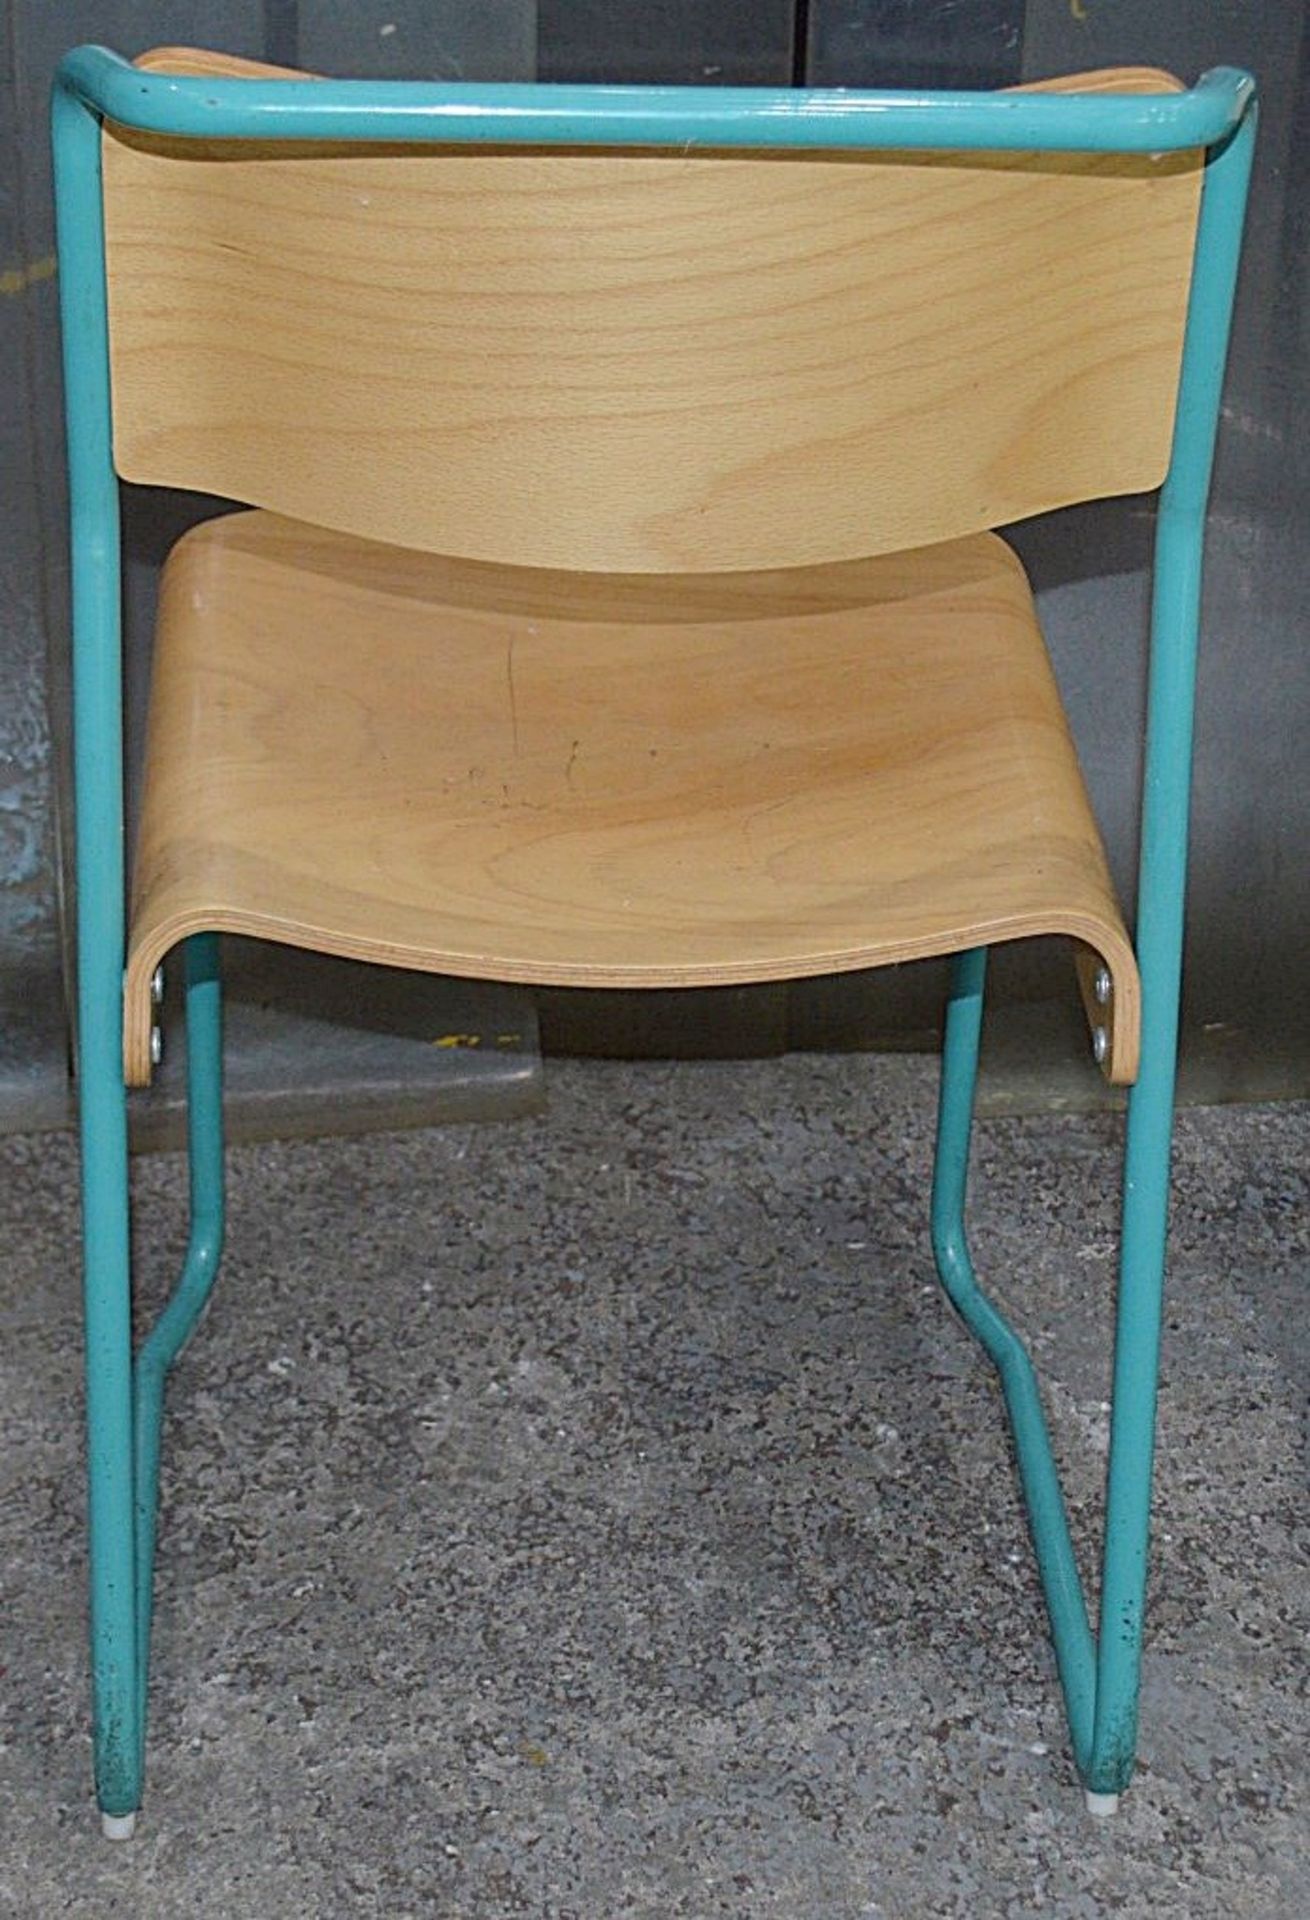 6 x Contemporary Stackable Bistro / Bar Chairs With Metal Frames With Curved Vanished Wooden Seats - Image 10 of 12